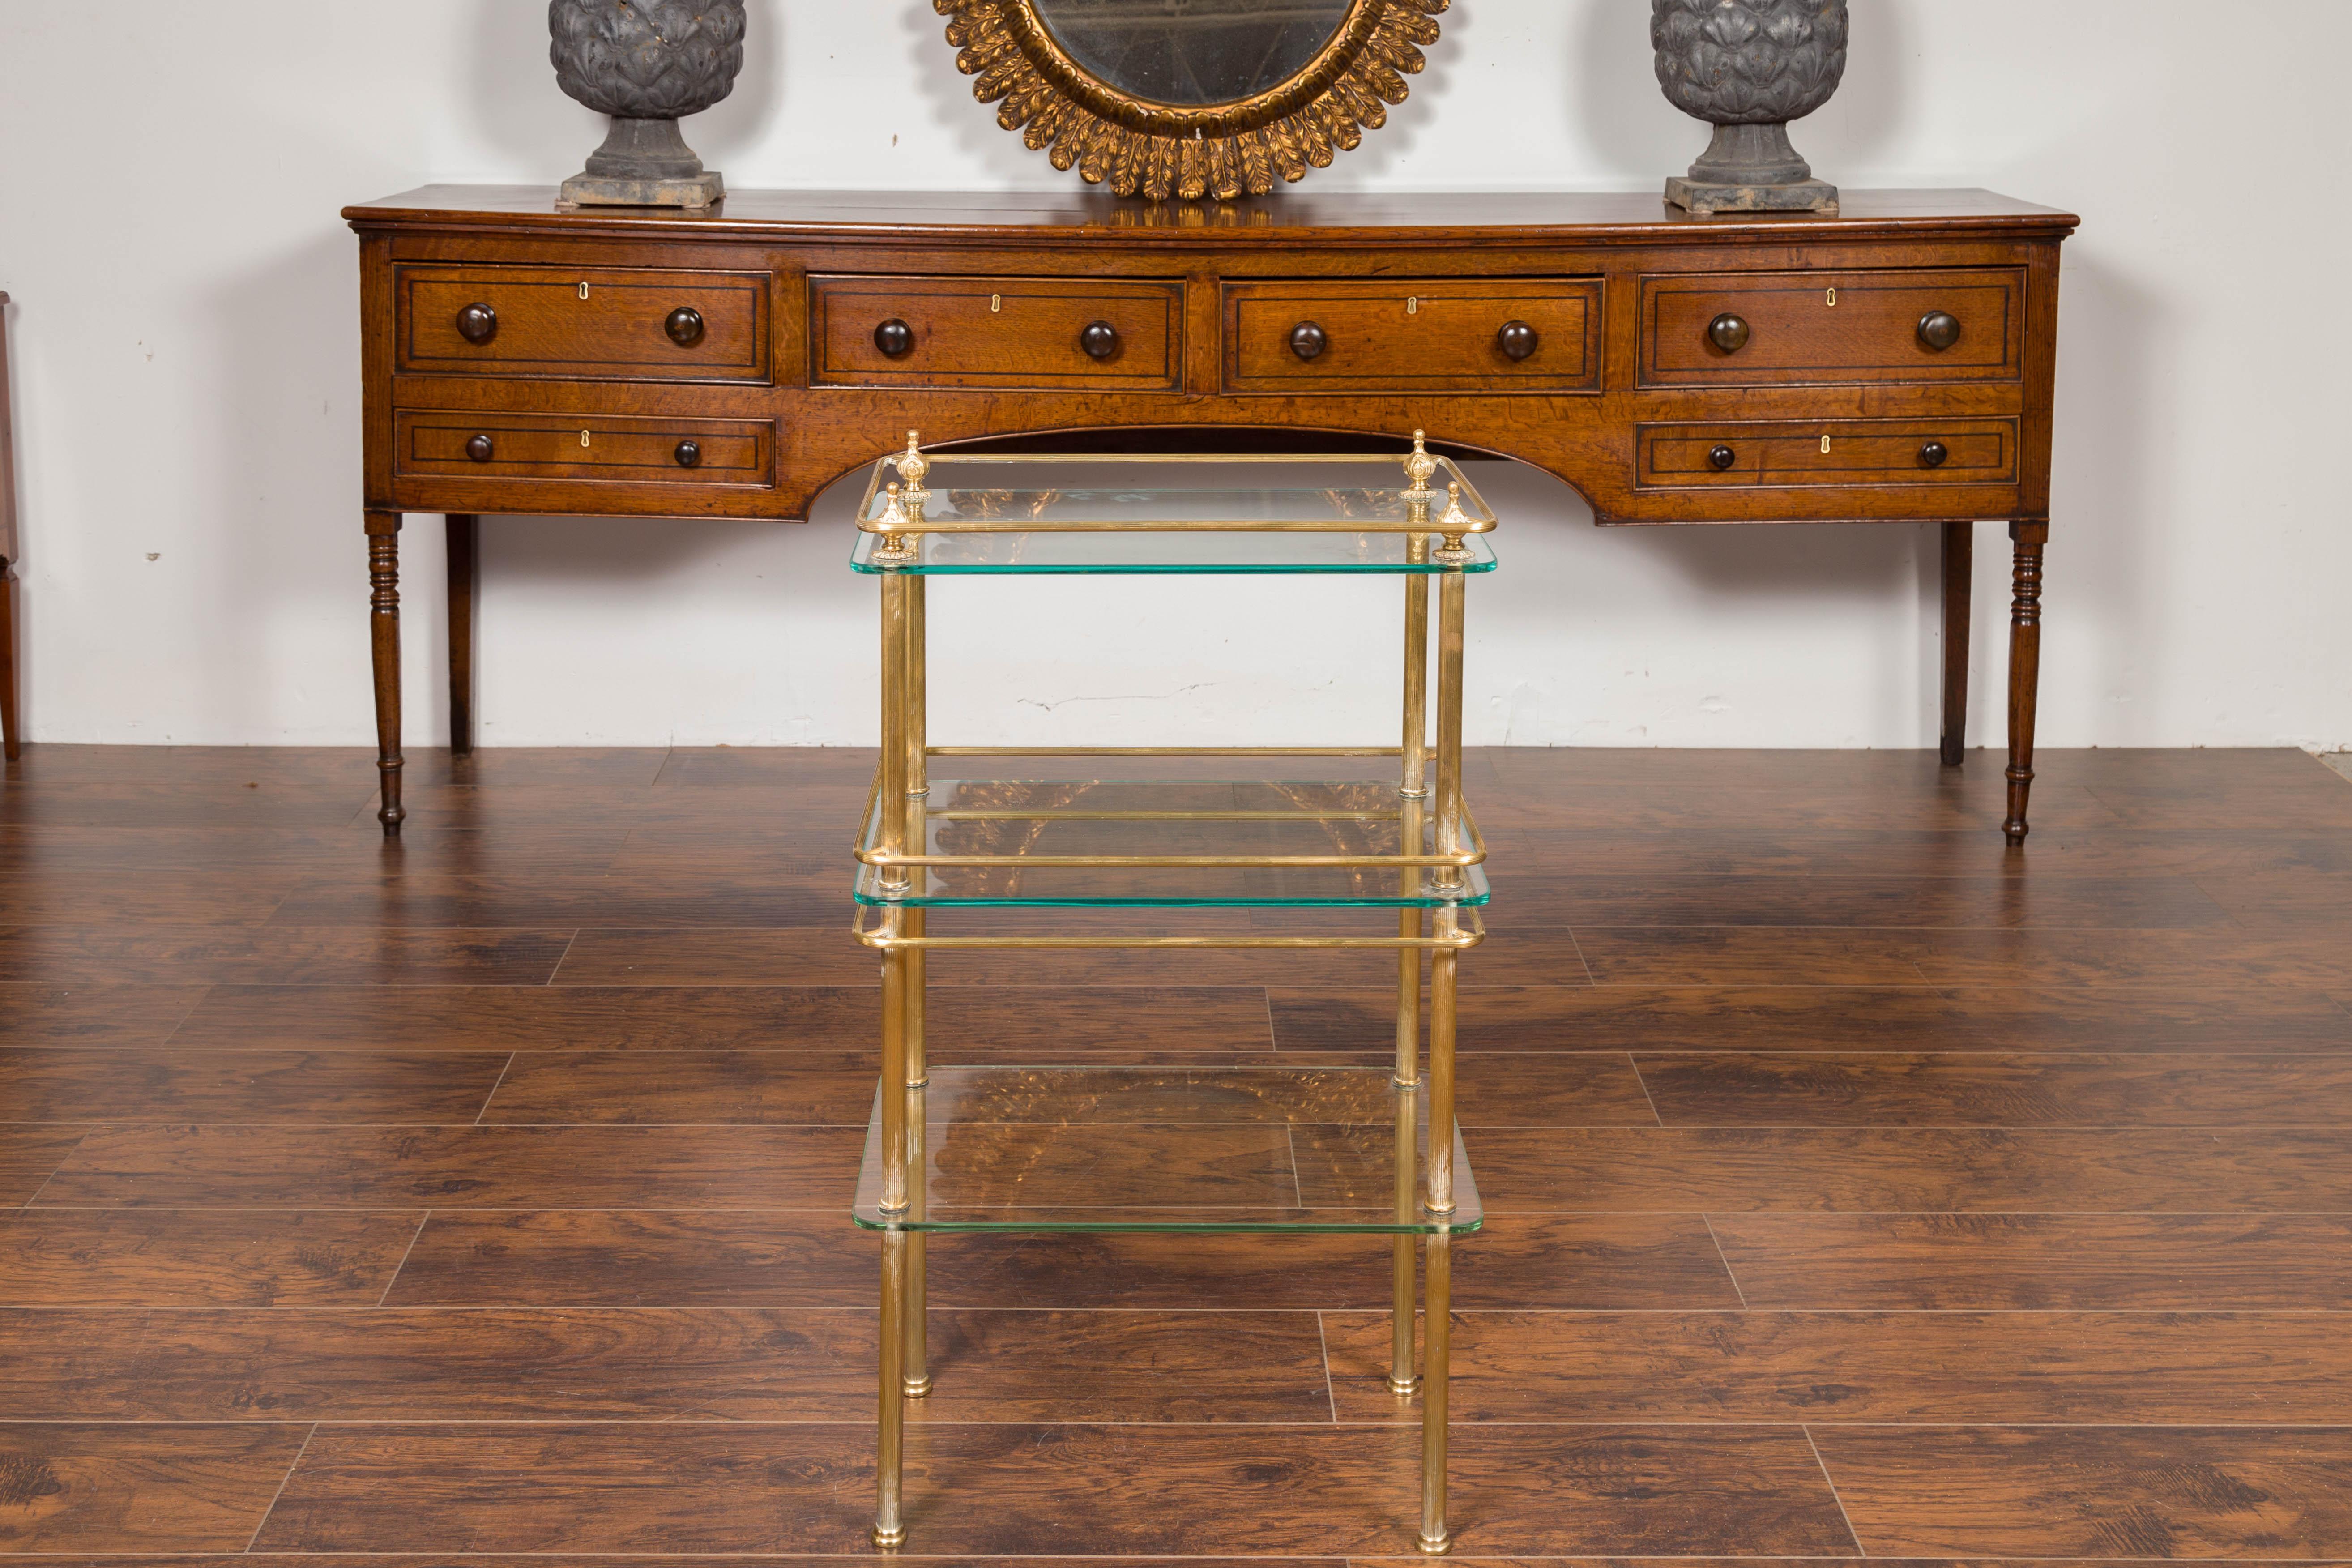 20th Century Italian Midcentury Tiered Brass Side Table with Glass Shelves and Petite Finials